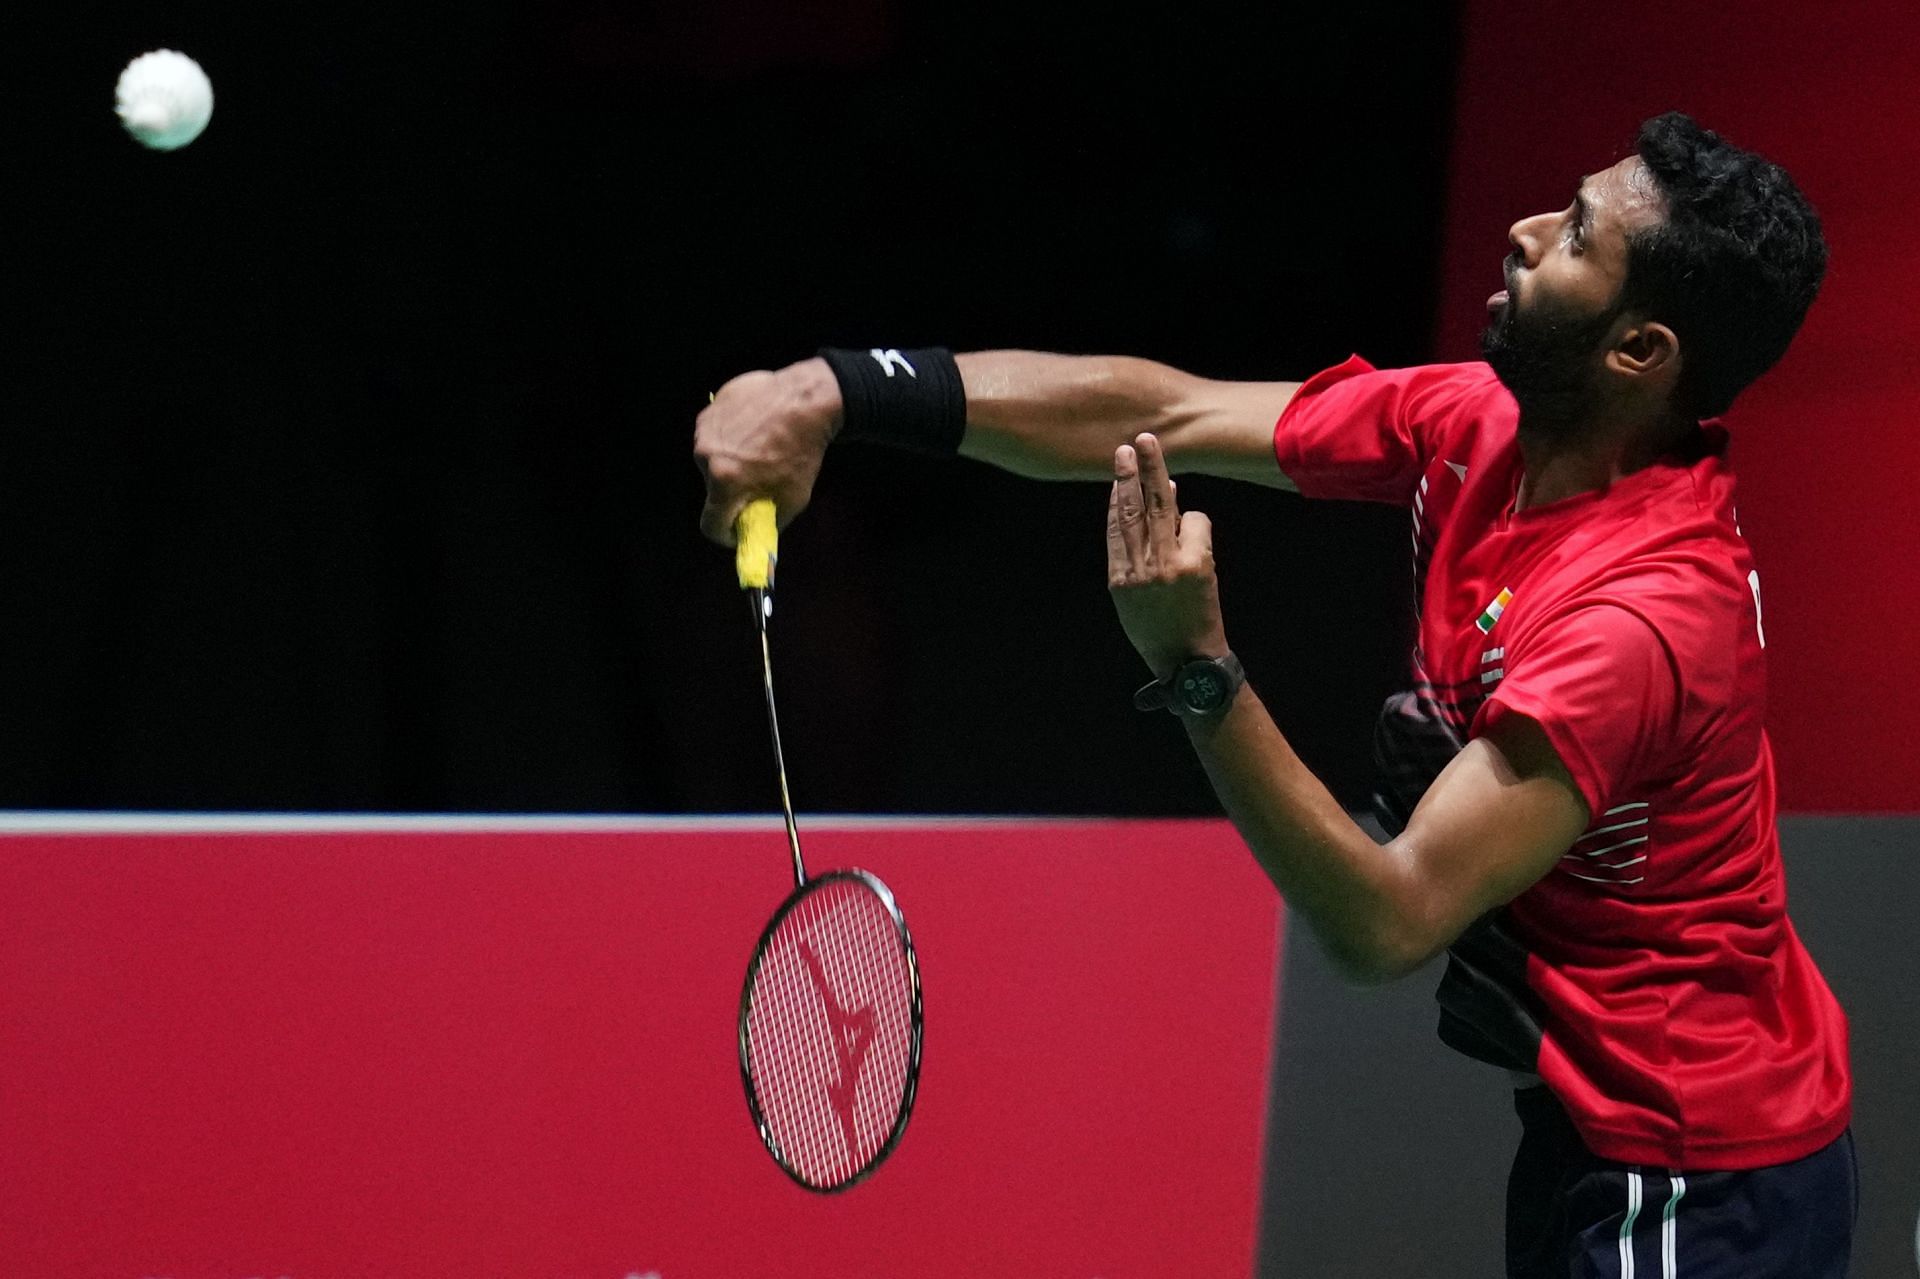 HS Prannoy stretched World No. 1 Viktor Axelsen to three games at the Japan Open (Image: Getty)